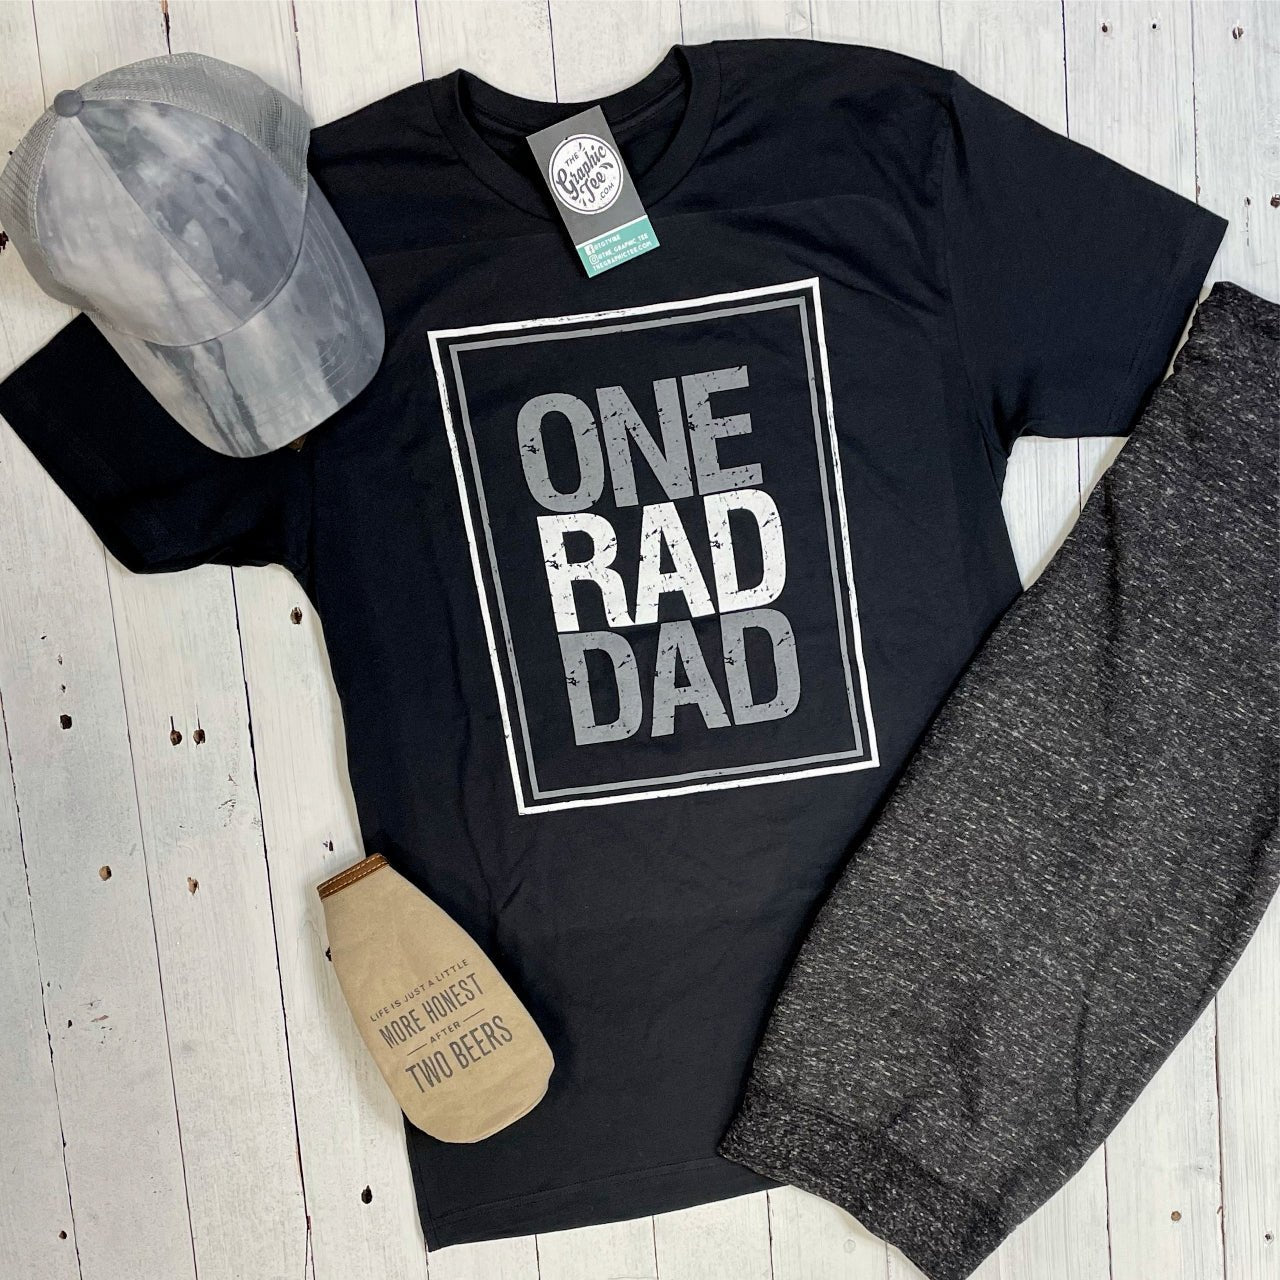 One Rad Dad - Adult Tee - The Graphic Tee